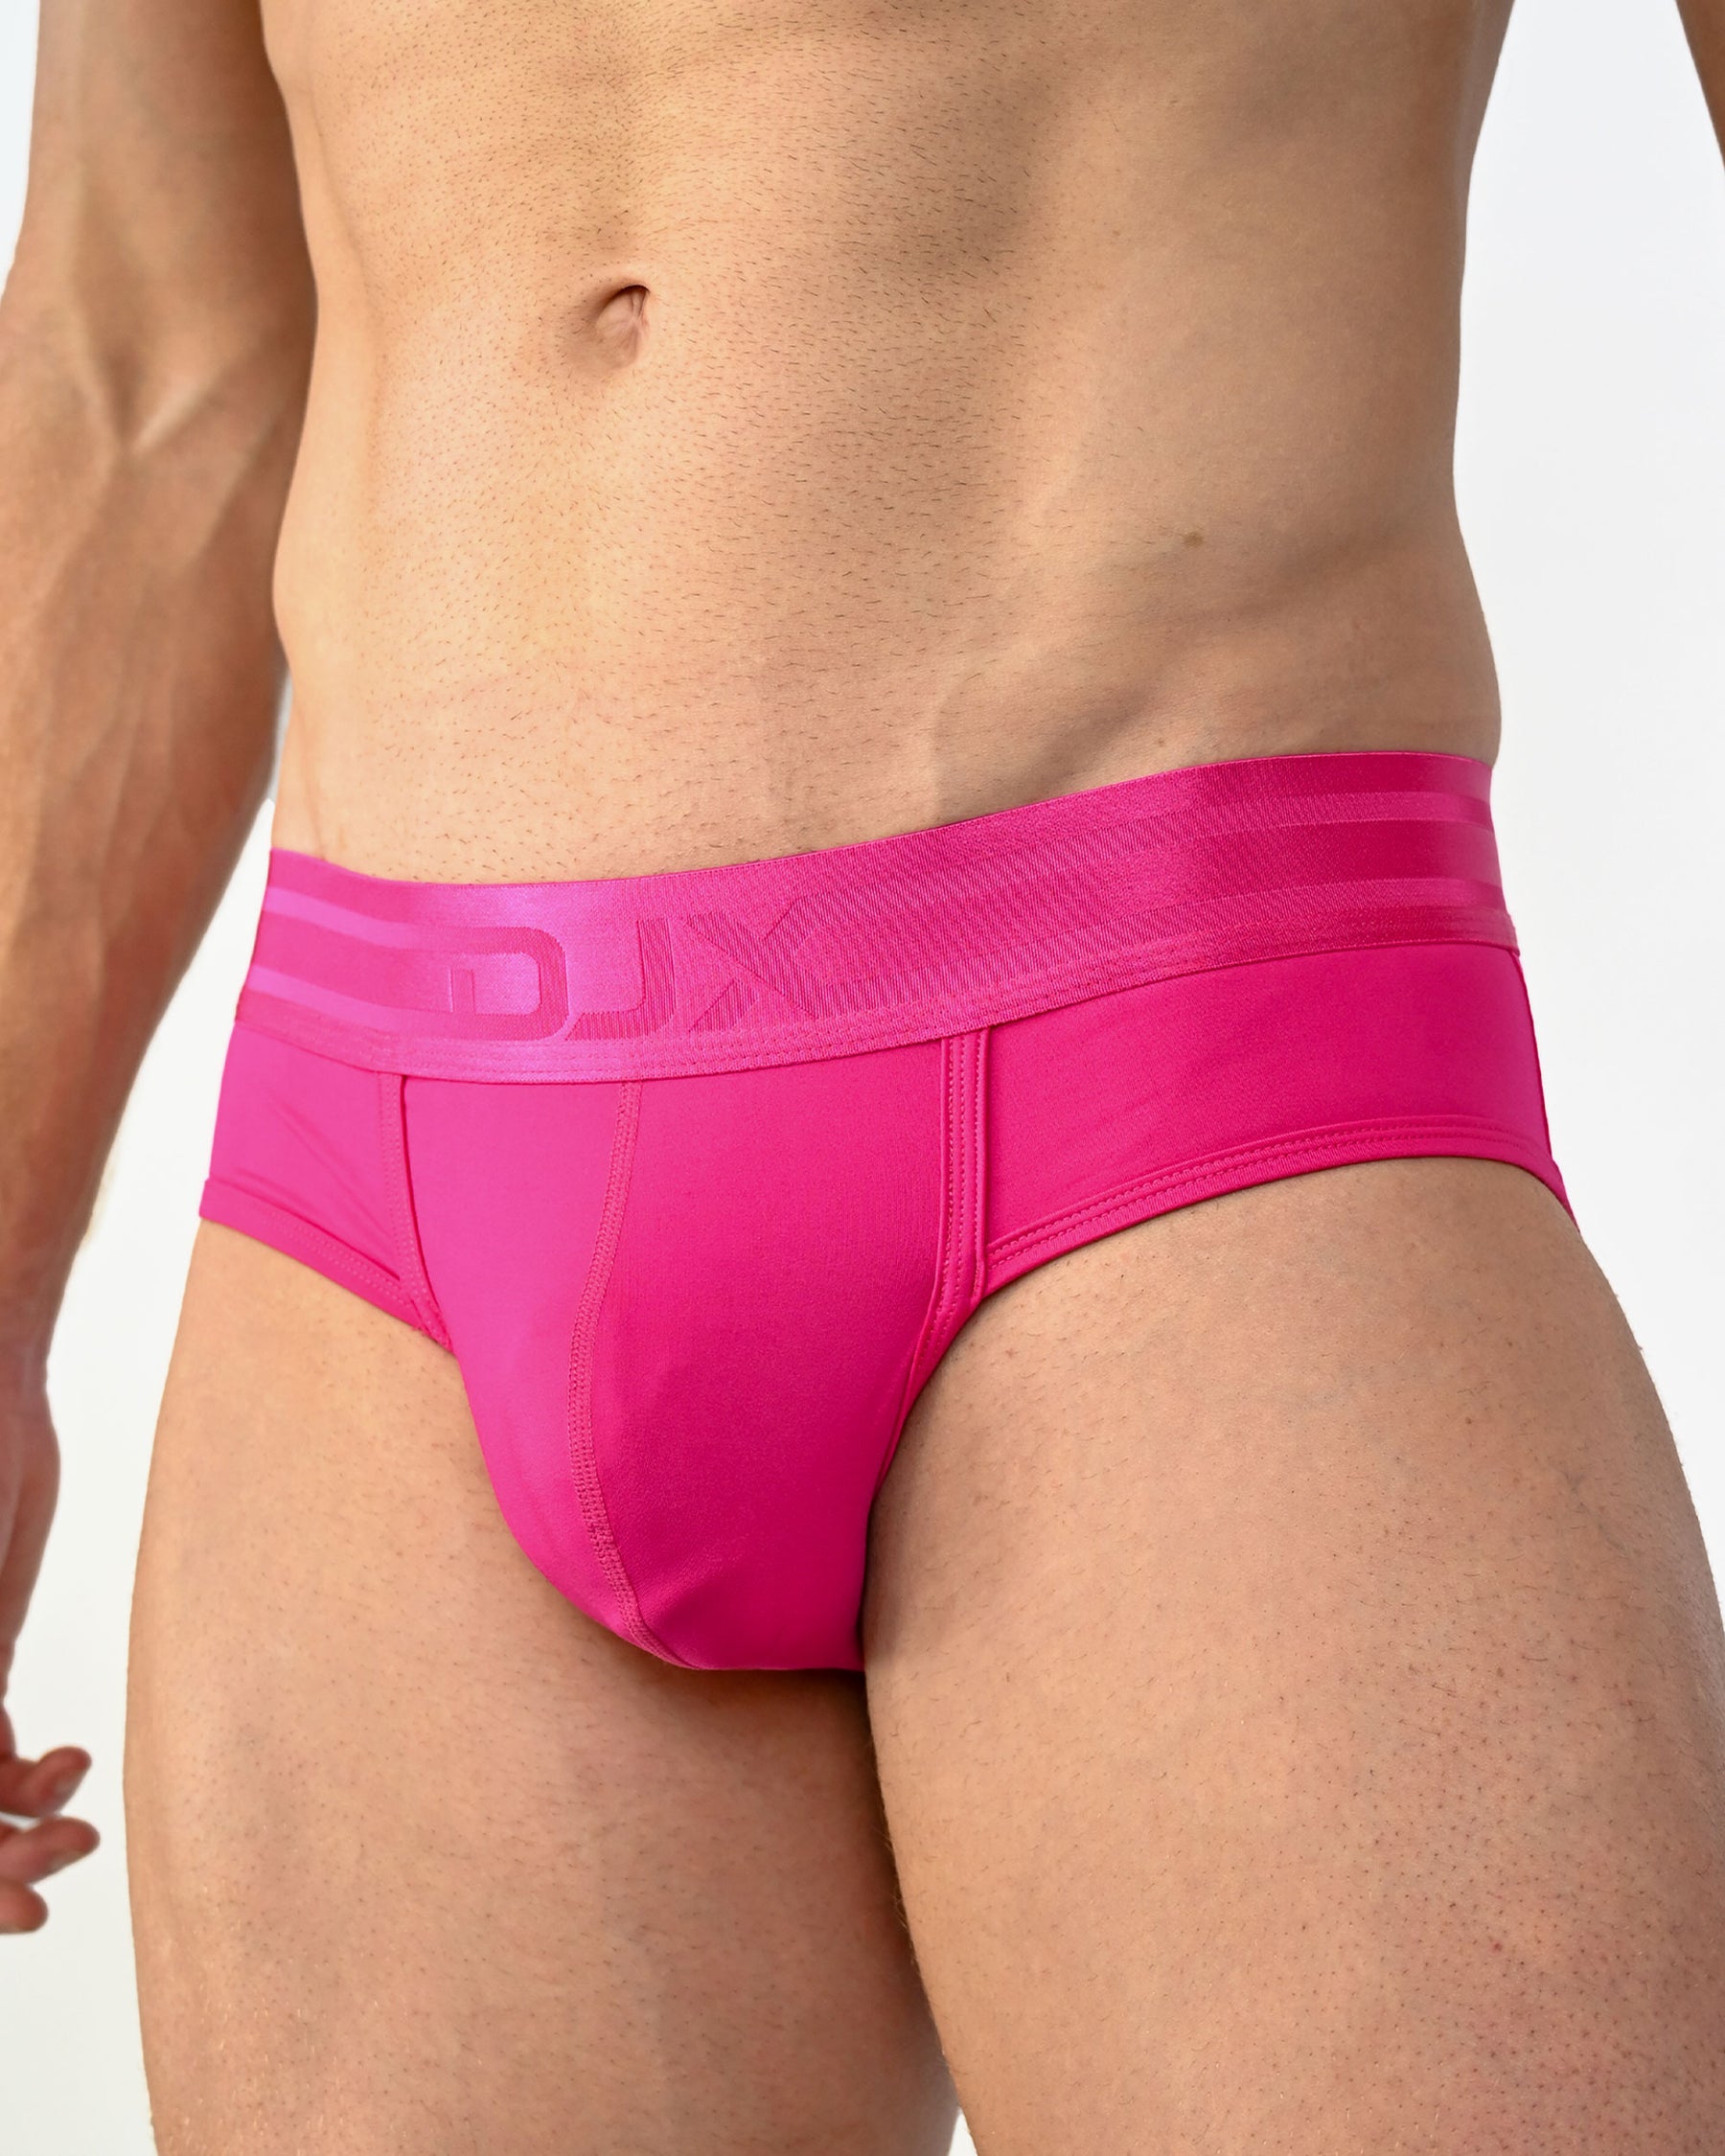 The Andrew Christian Underwear Technology Collections Explained